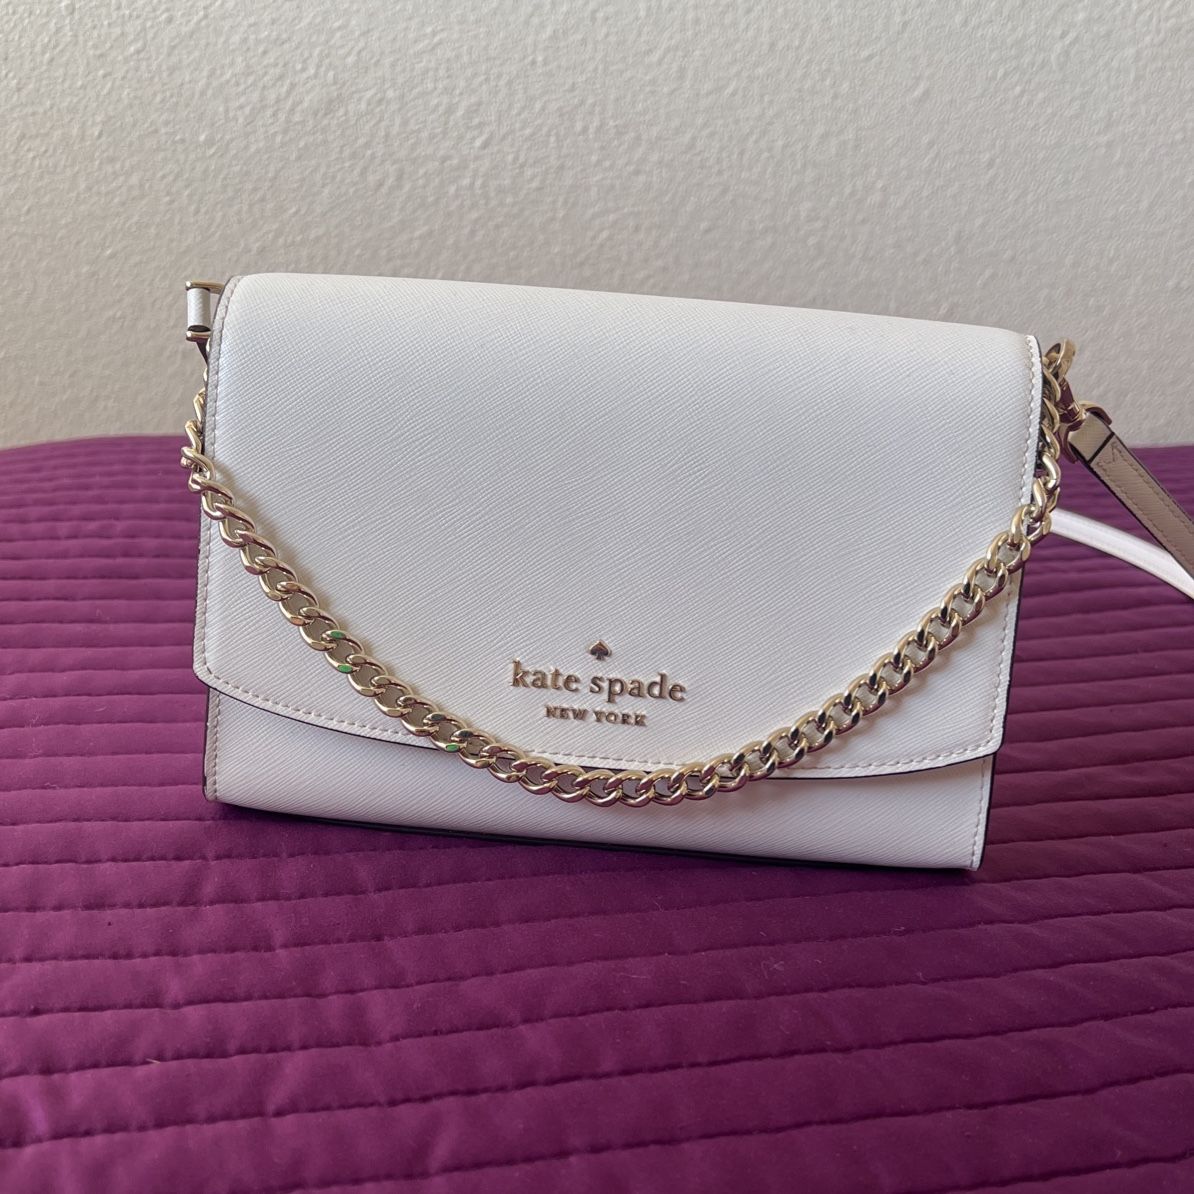 Carson Crossbody With Wallet for Sale in Costa Mesa, CA - OfferUp